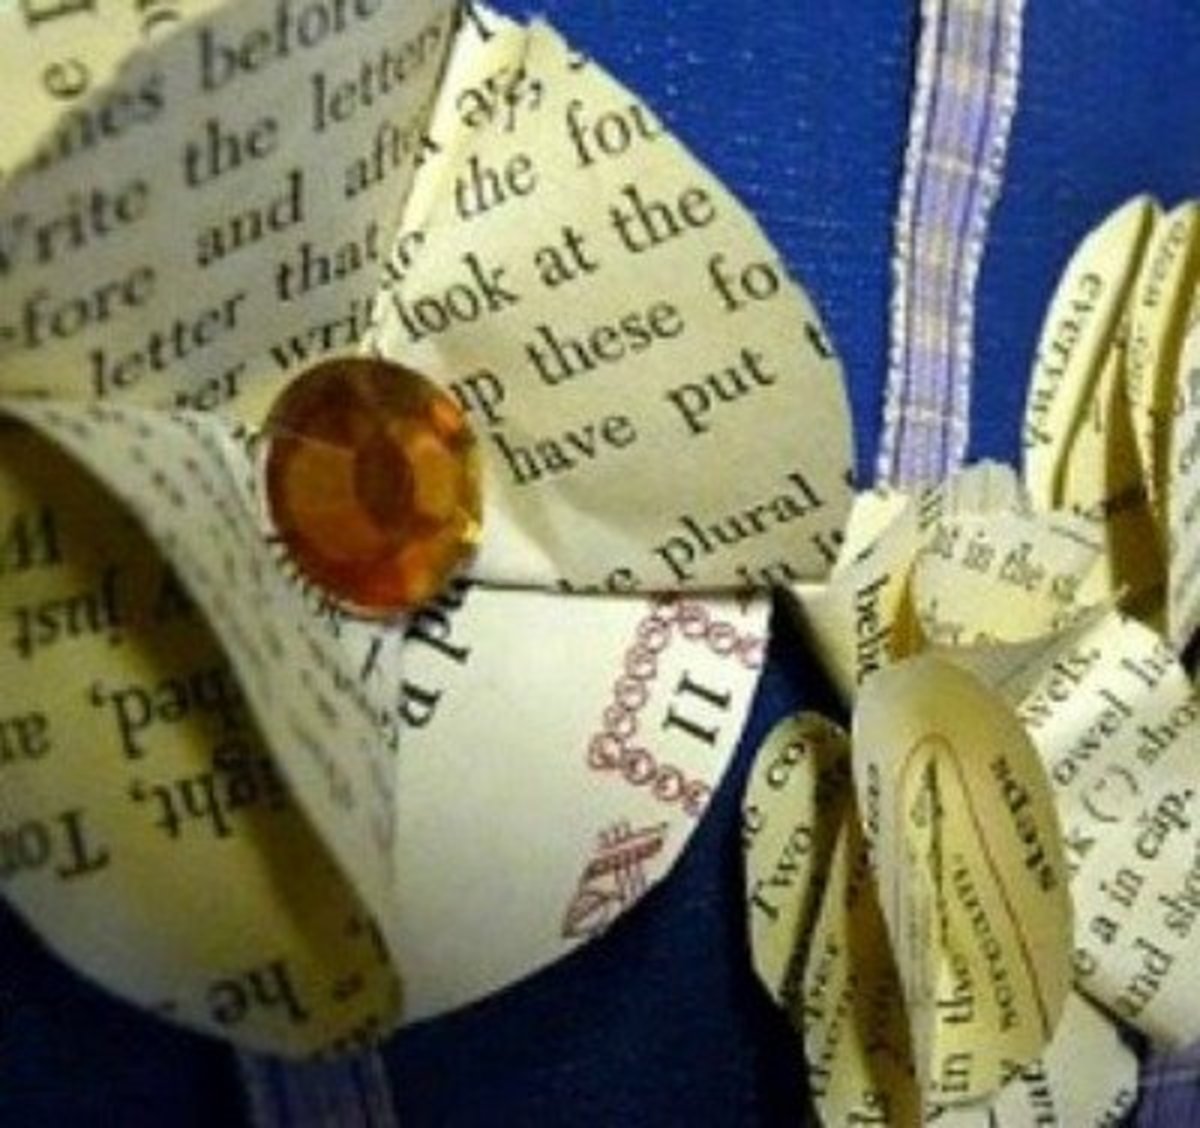 53 Creative Craft Ideas Using Book Pages - FeltMagnet - Crafts